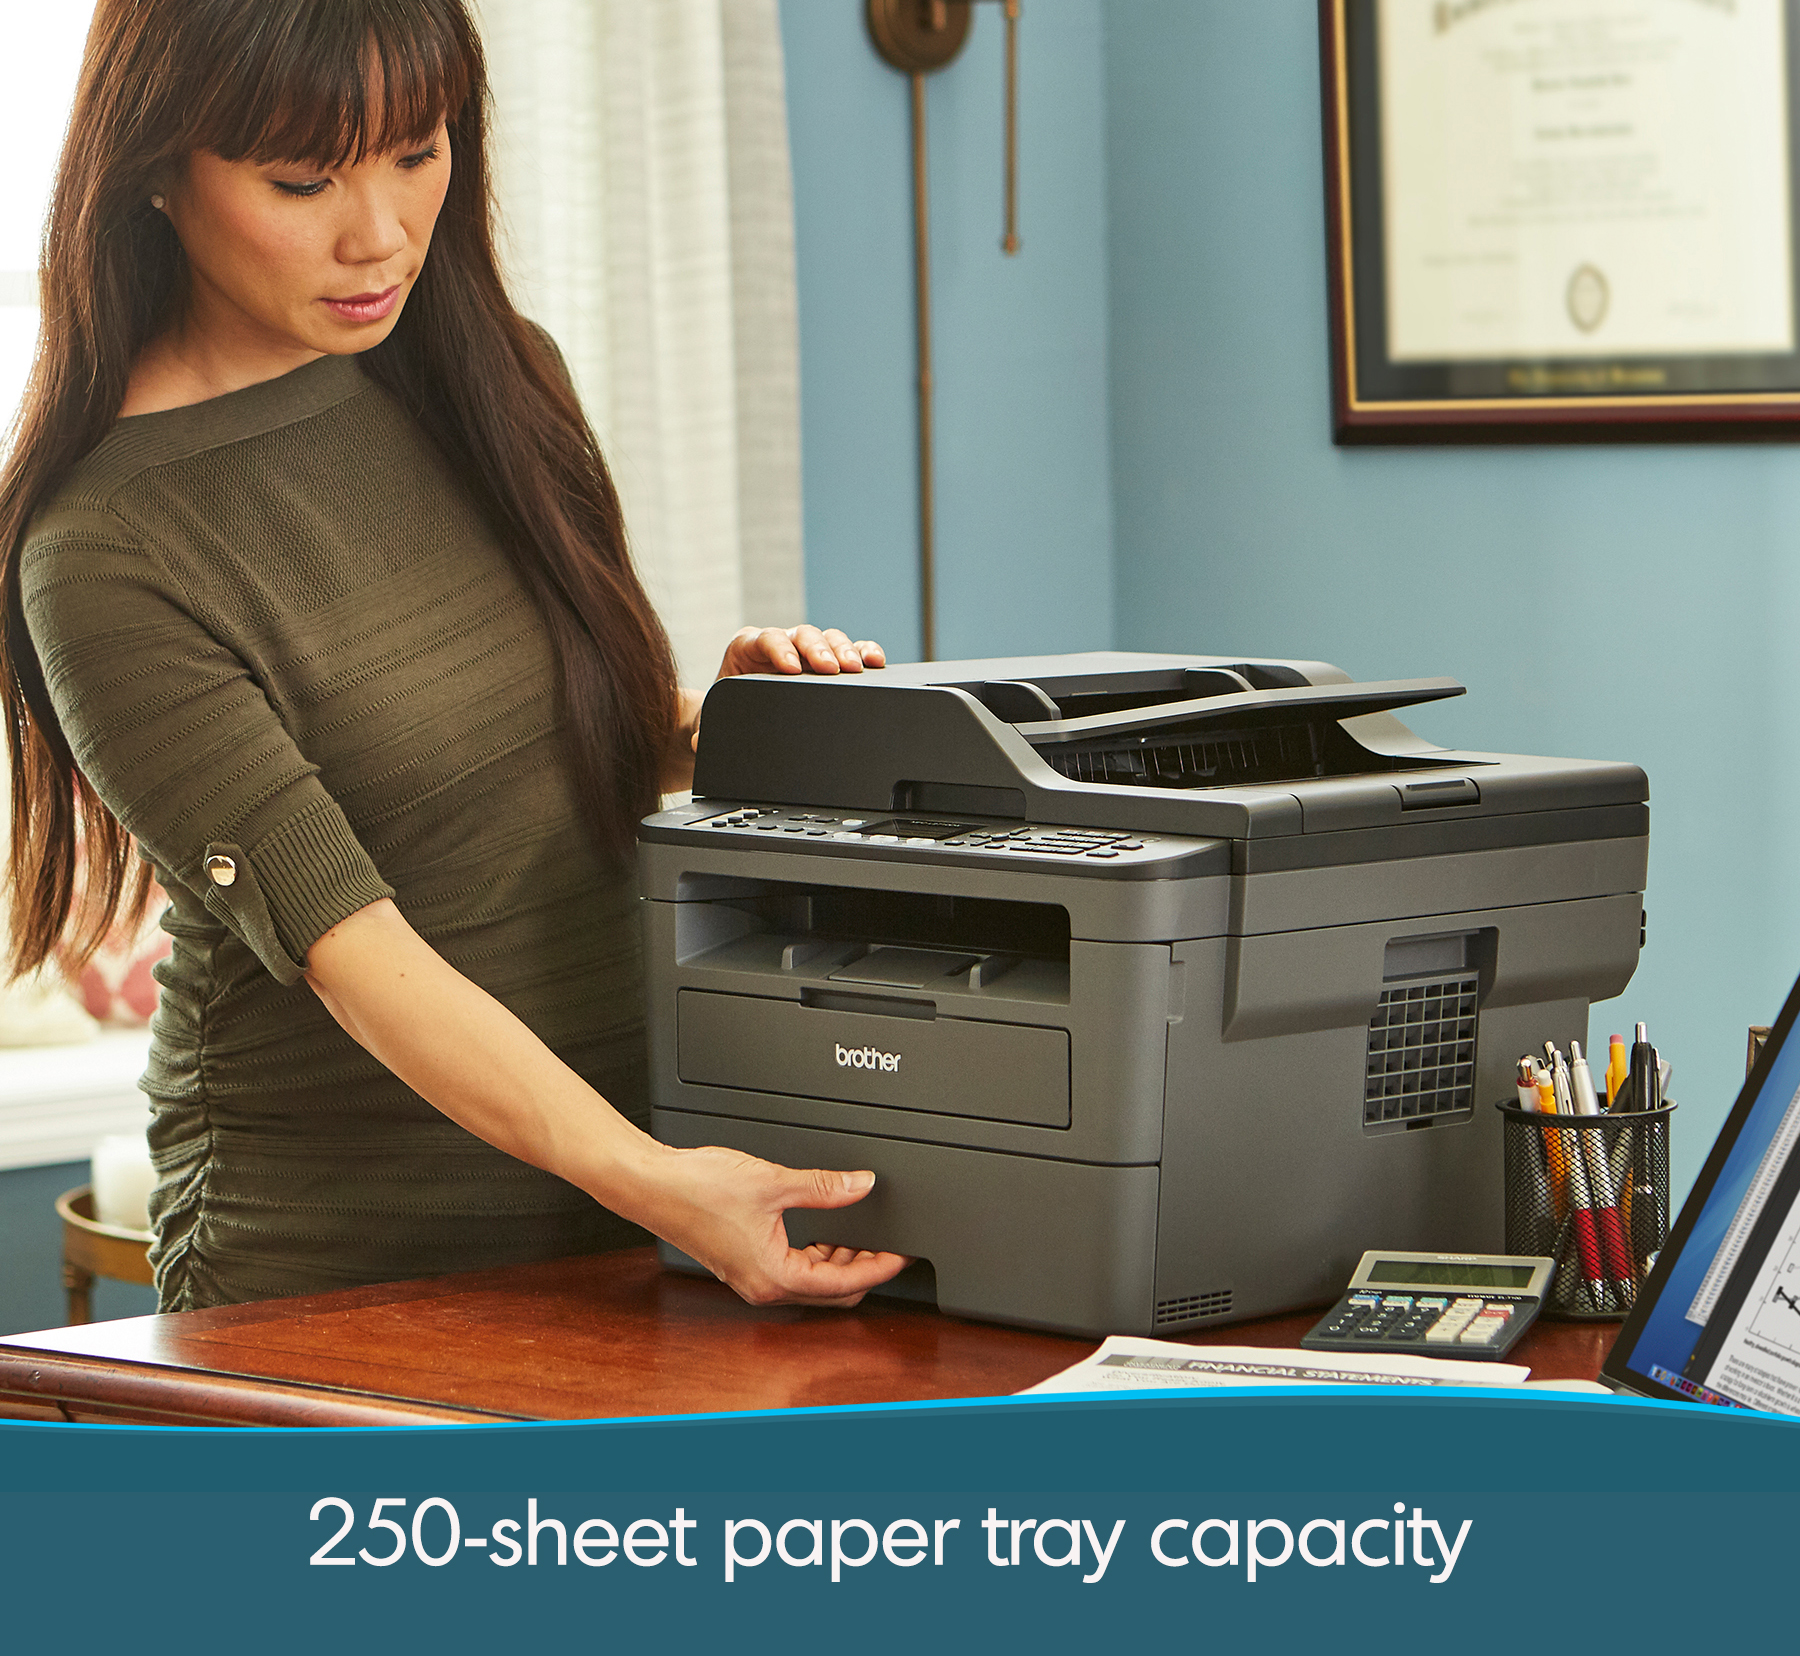 Brother MFC-L2710DW Monochrome Laser All-in-One Printer, Duplex Printing, Wireless Connectivity - image 5 of 10